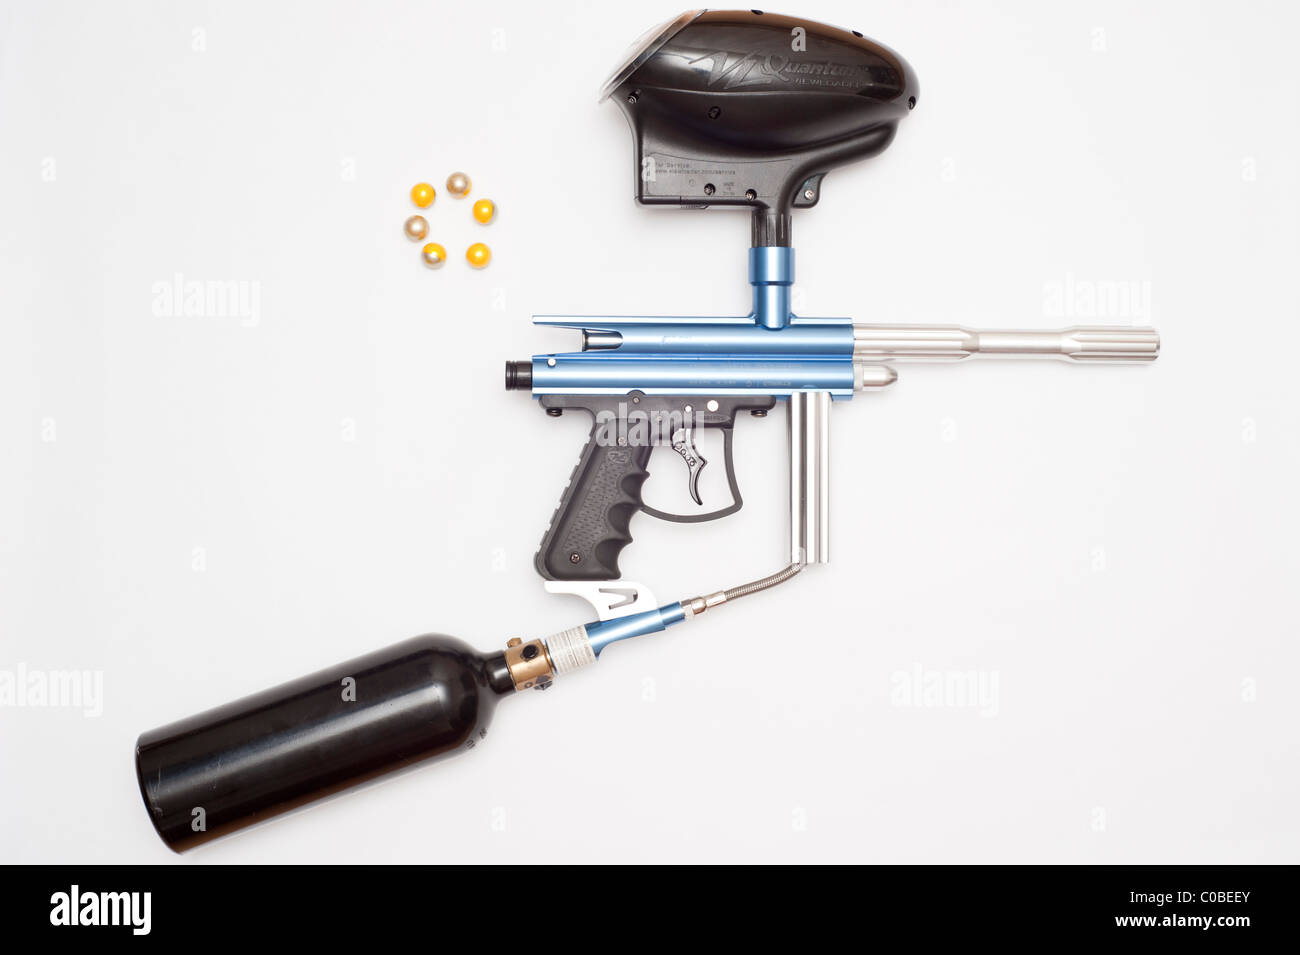 A paintball gun complete with gas canister and paintballs ammunition on a white background Stock Photo